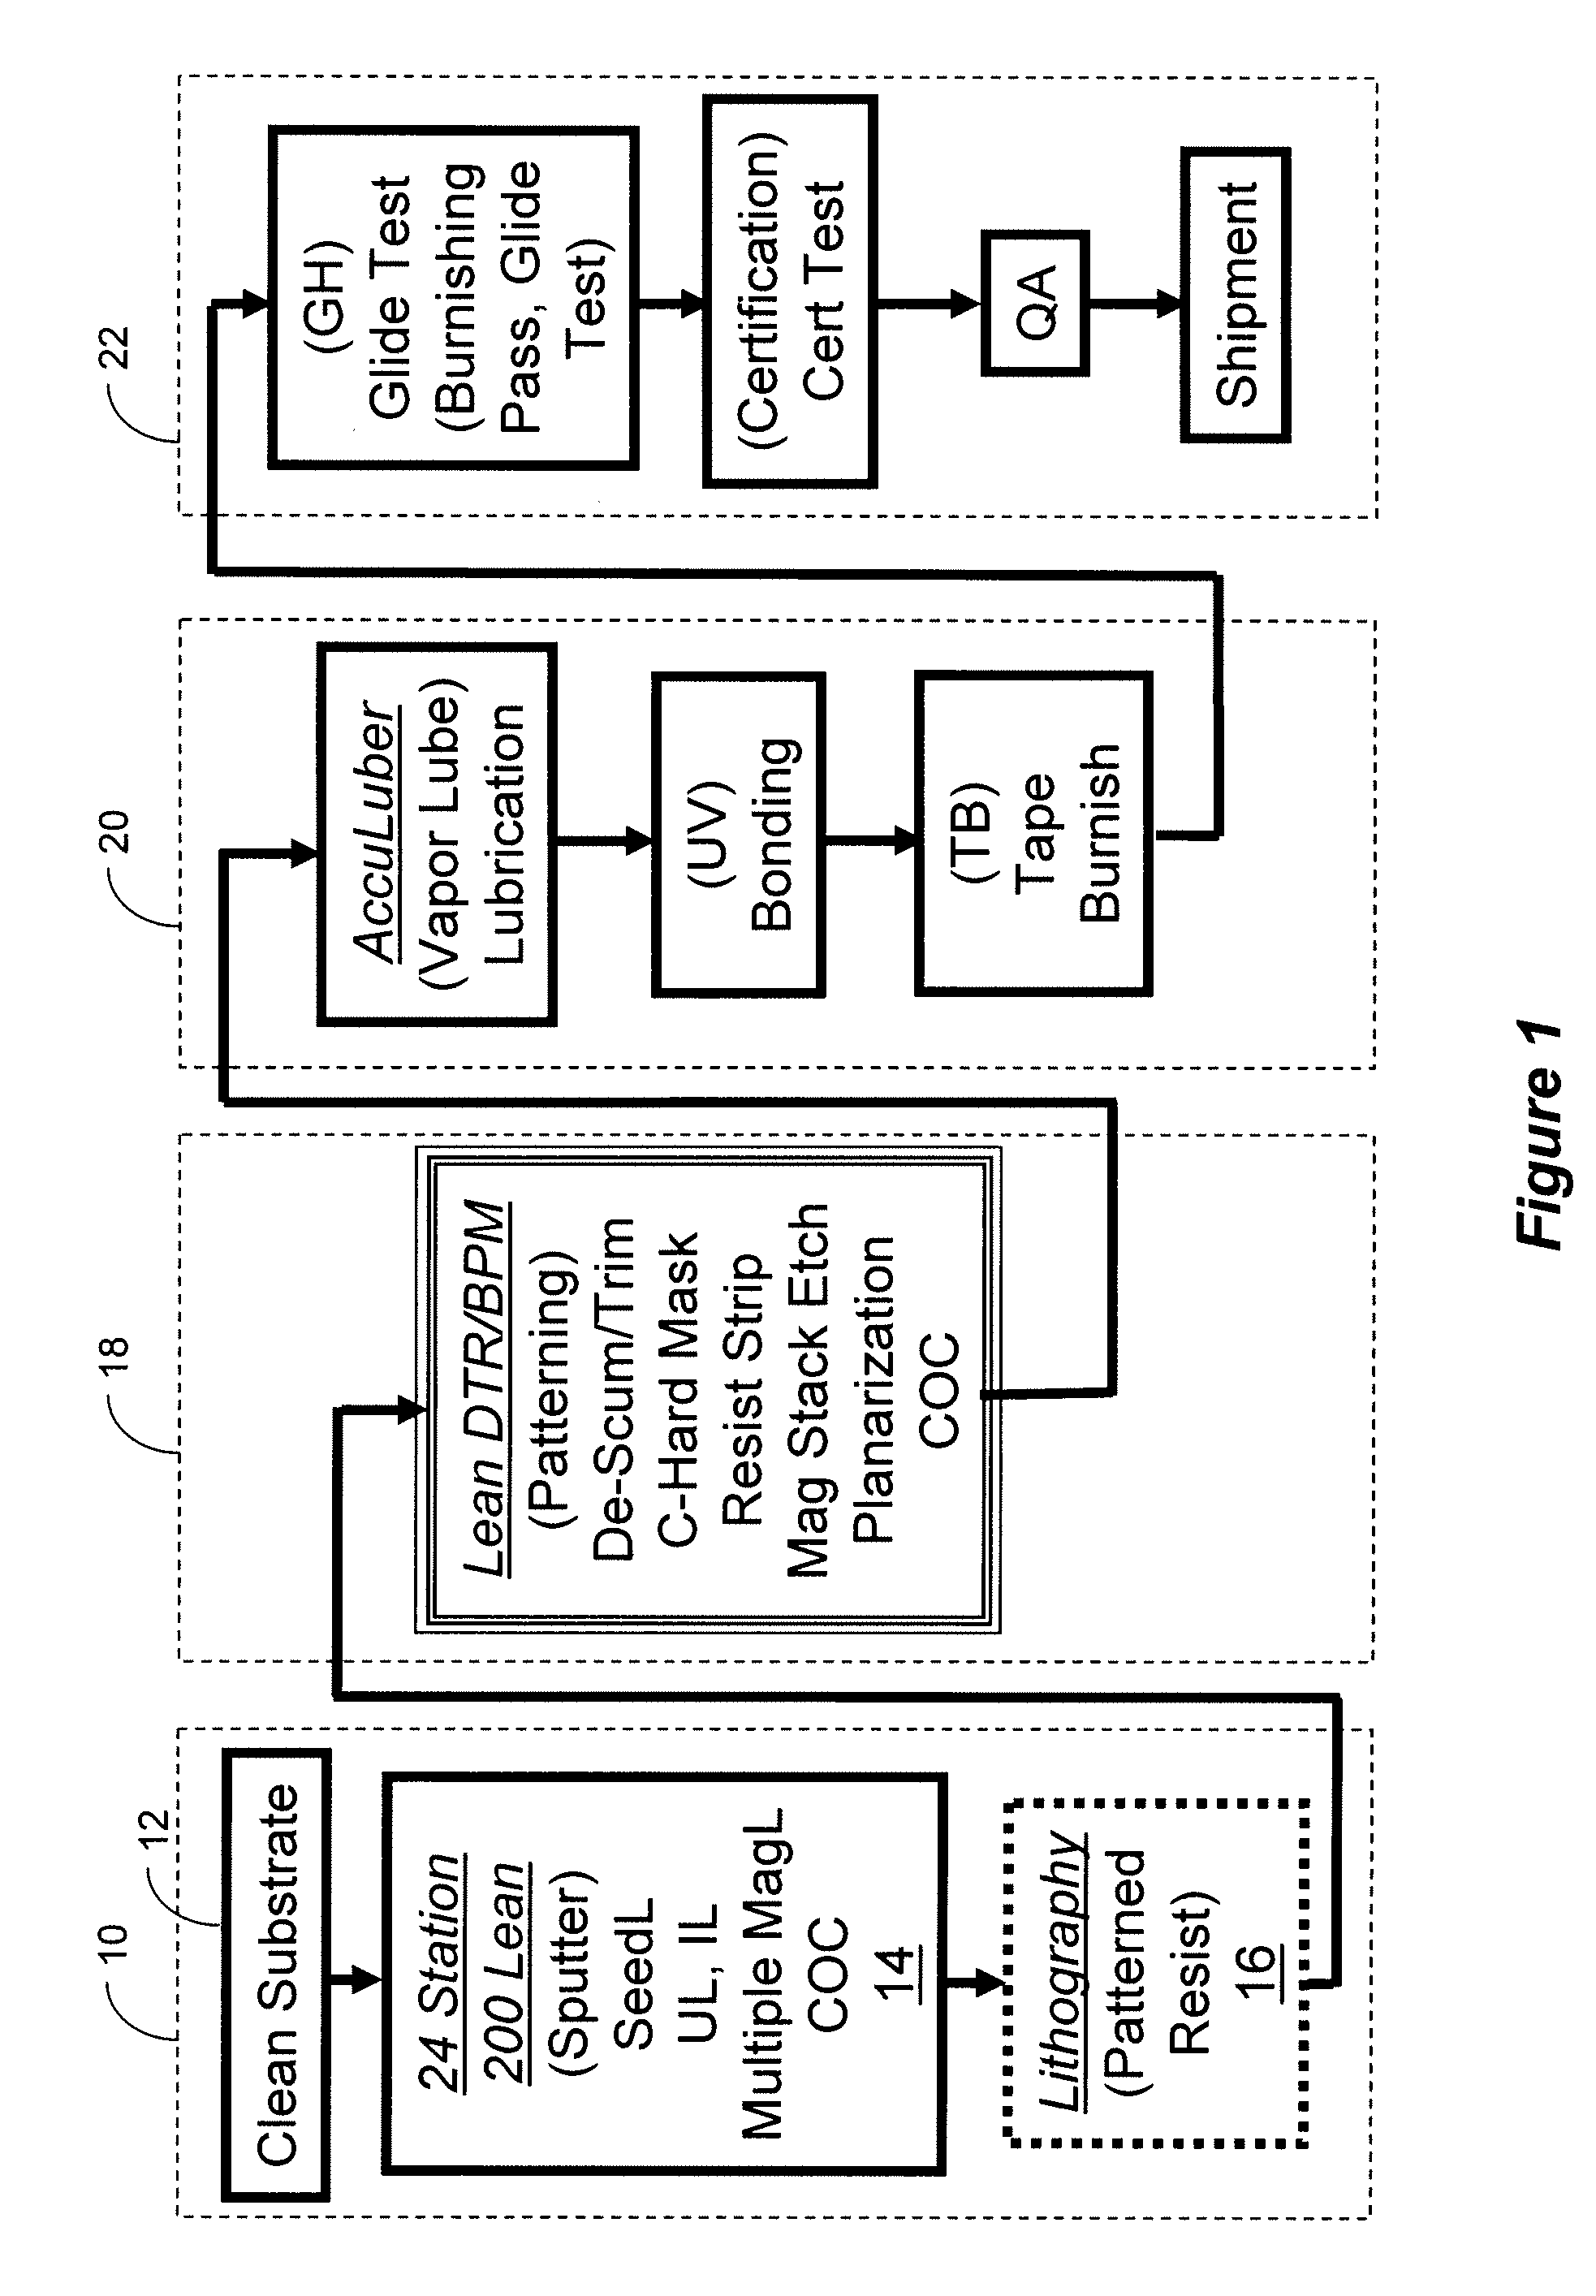 System and method for commercial fabrication of patterned media